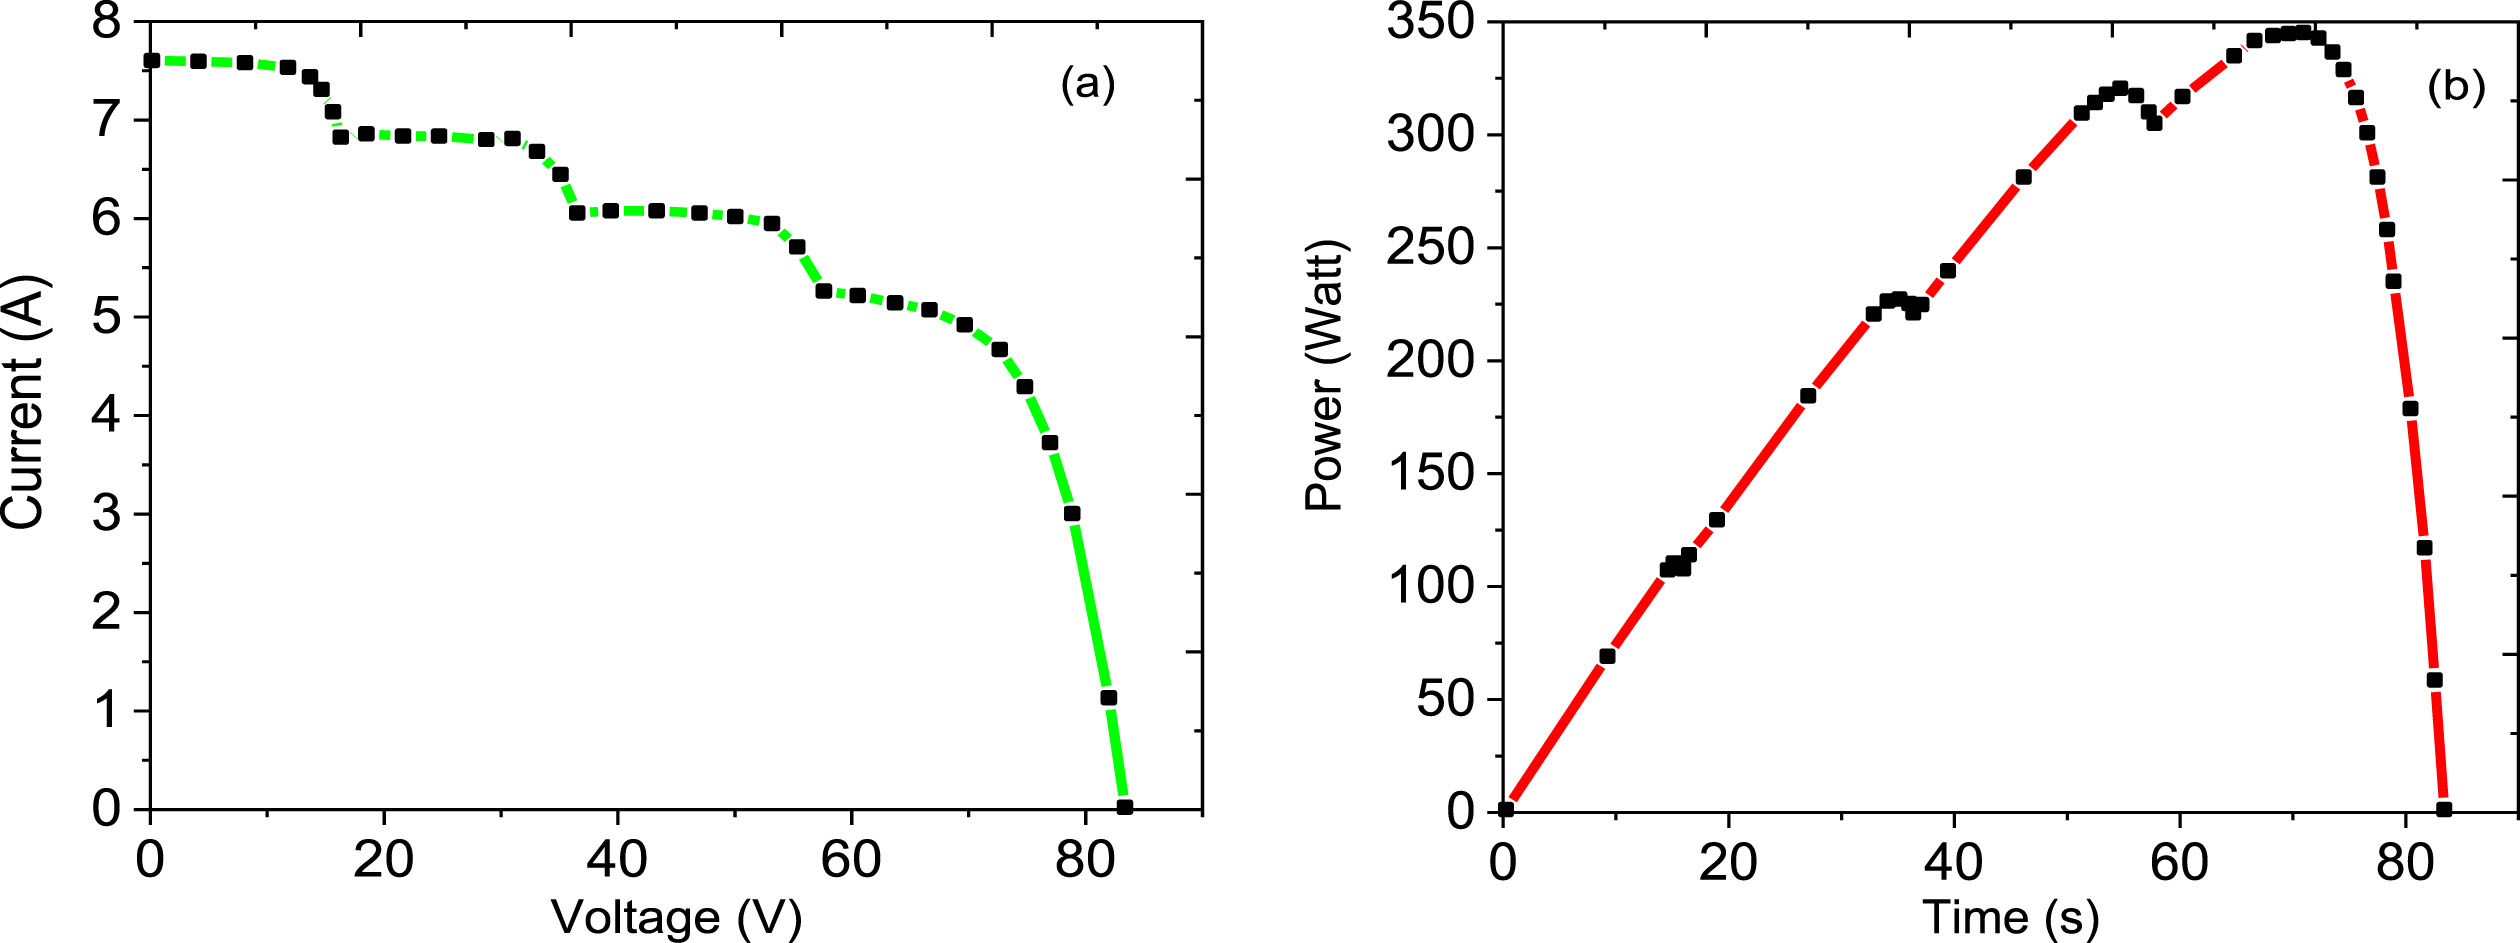 PV module P-V curve (a) and I-V curve (b) under partial shading conditions.